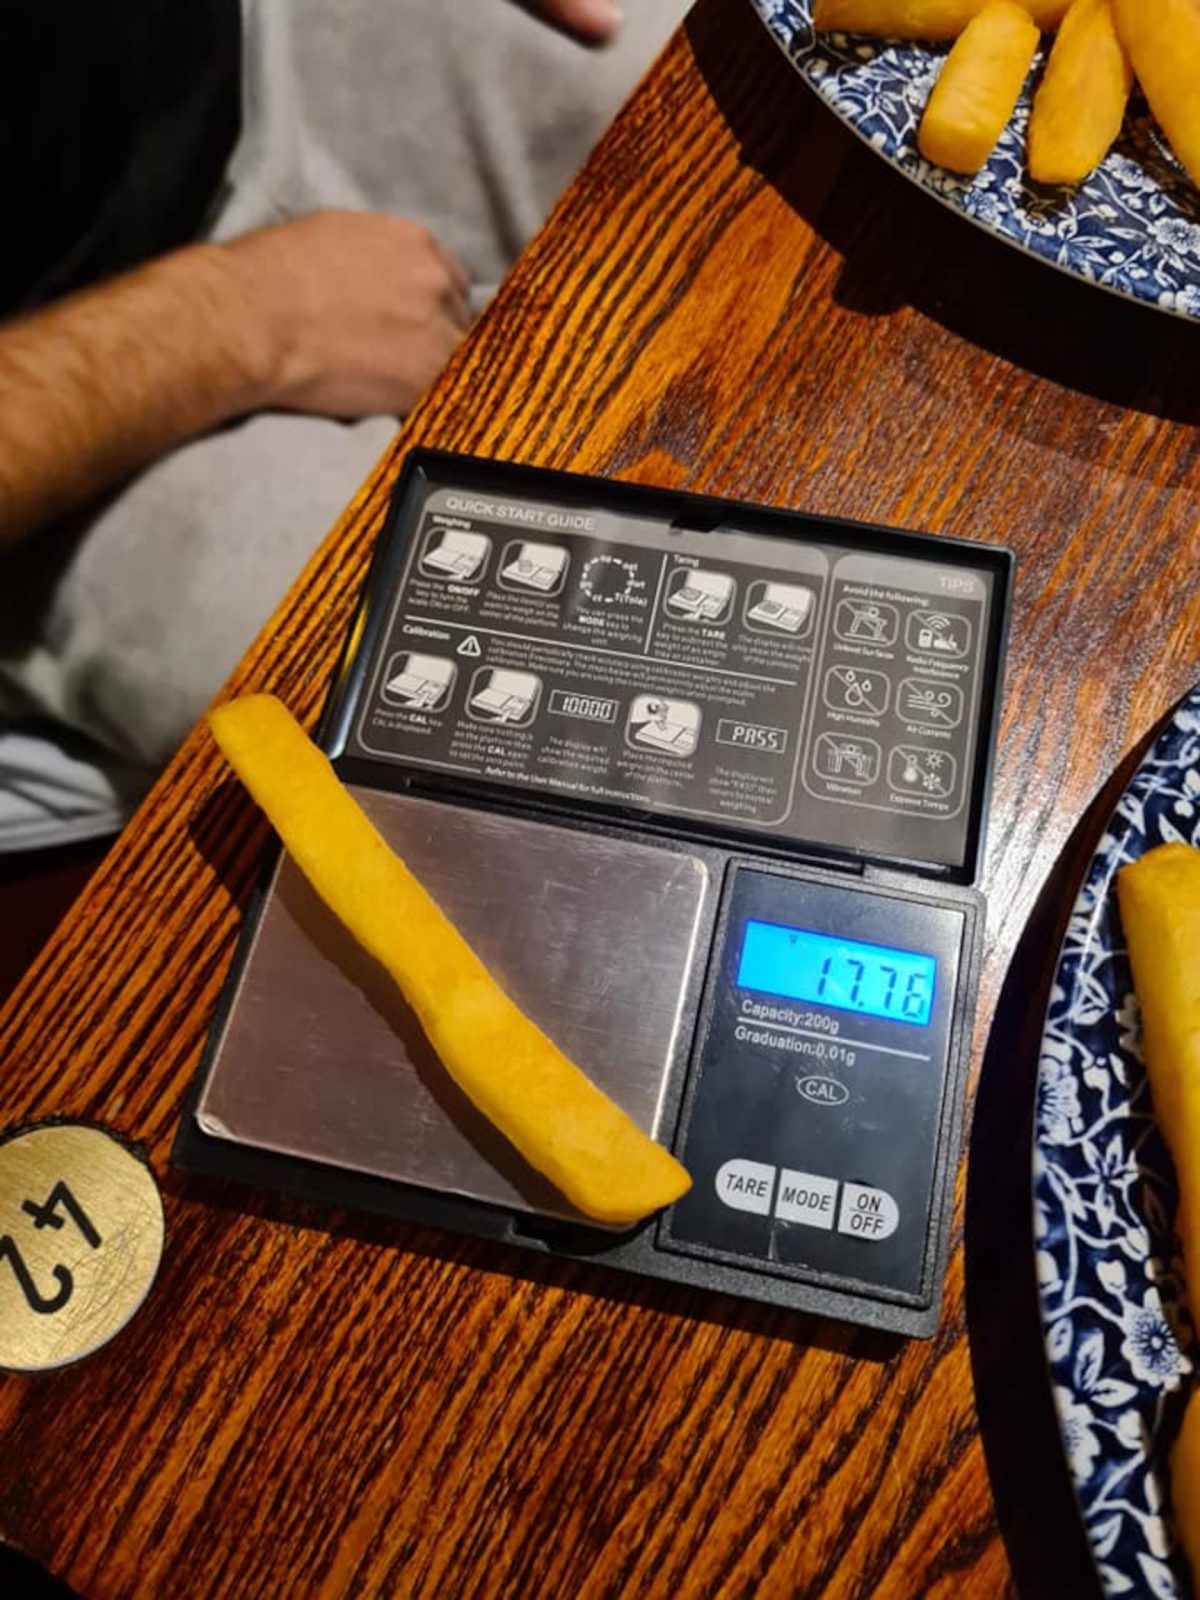 Ashley's weight being measured on a set of scales